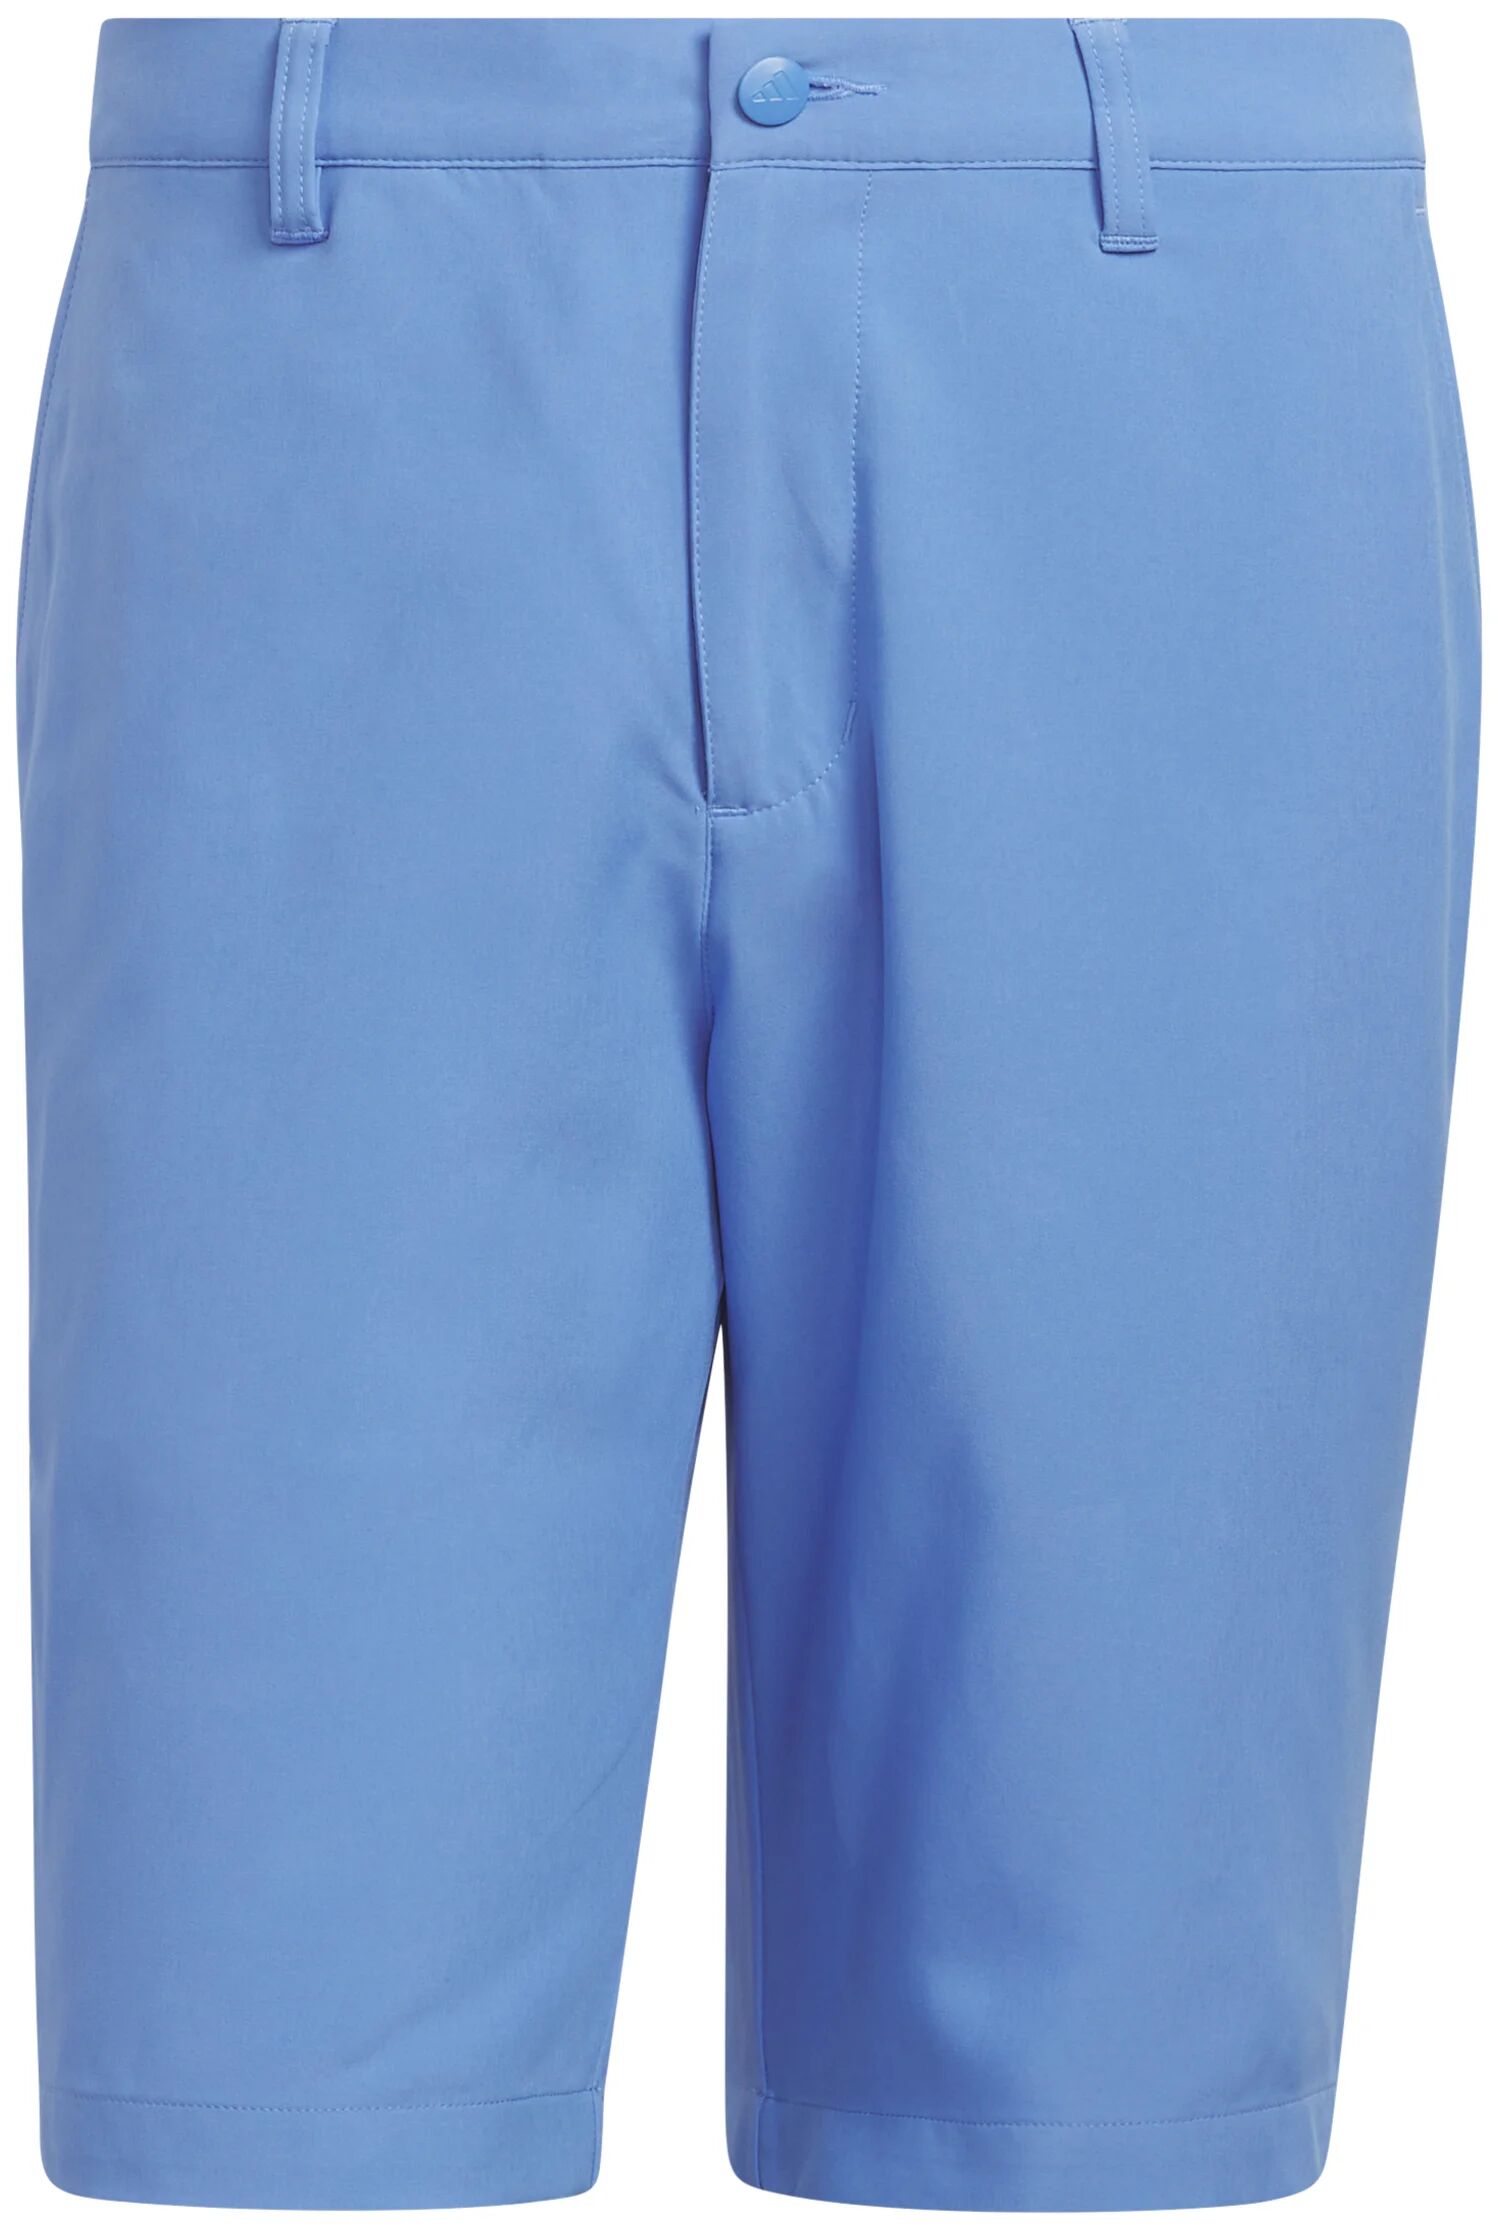 adidas Ultimate365 10 Inch Men's Golf Shorts 2024 - Blue, Size: 33